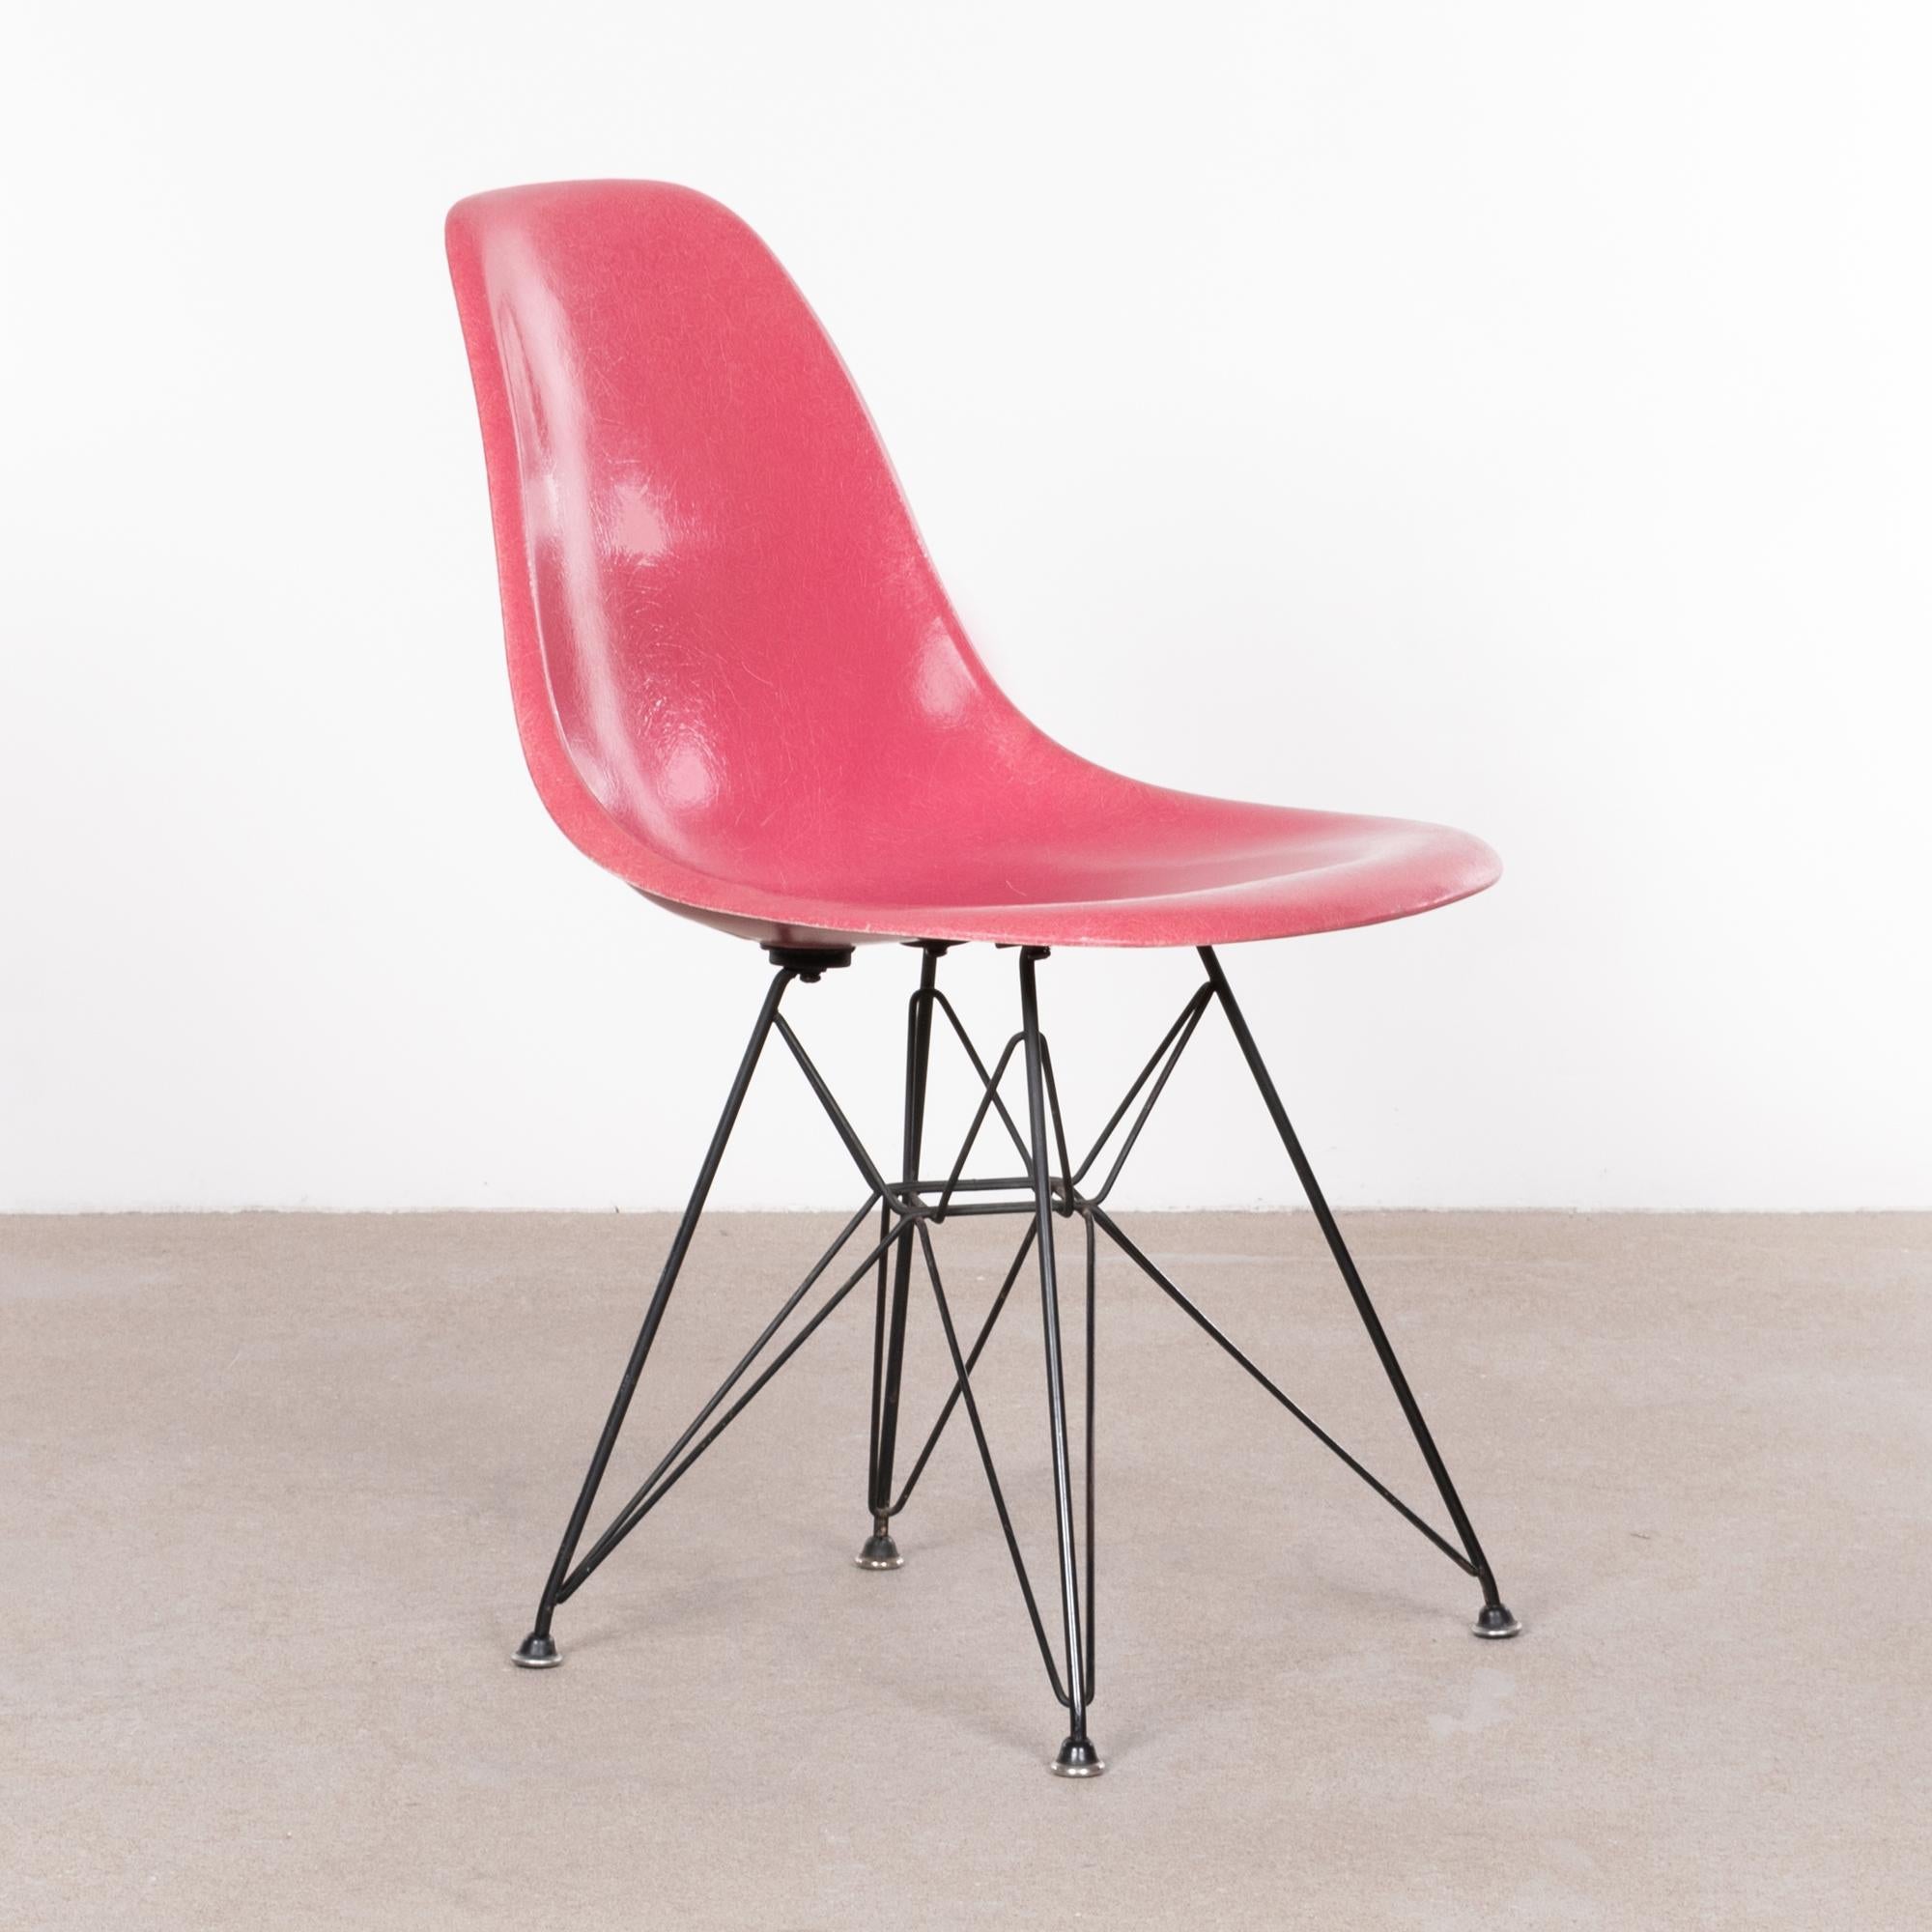 Beautiful iconic DSR chair in rare pink color. The fiberglass shell is in very good vintage condition with only slight traces of use. Original black enamebeled steel base also in very good condition. The chair is signed with embossed Herman Miller